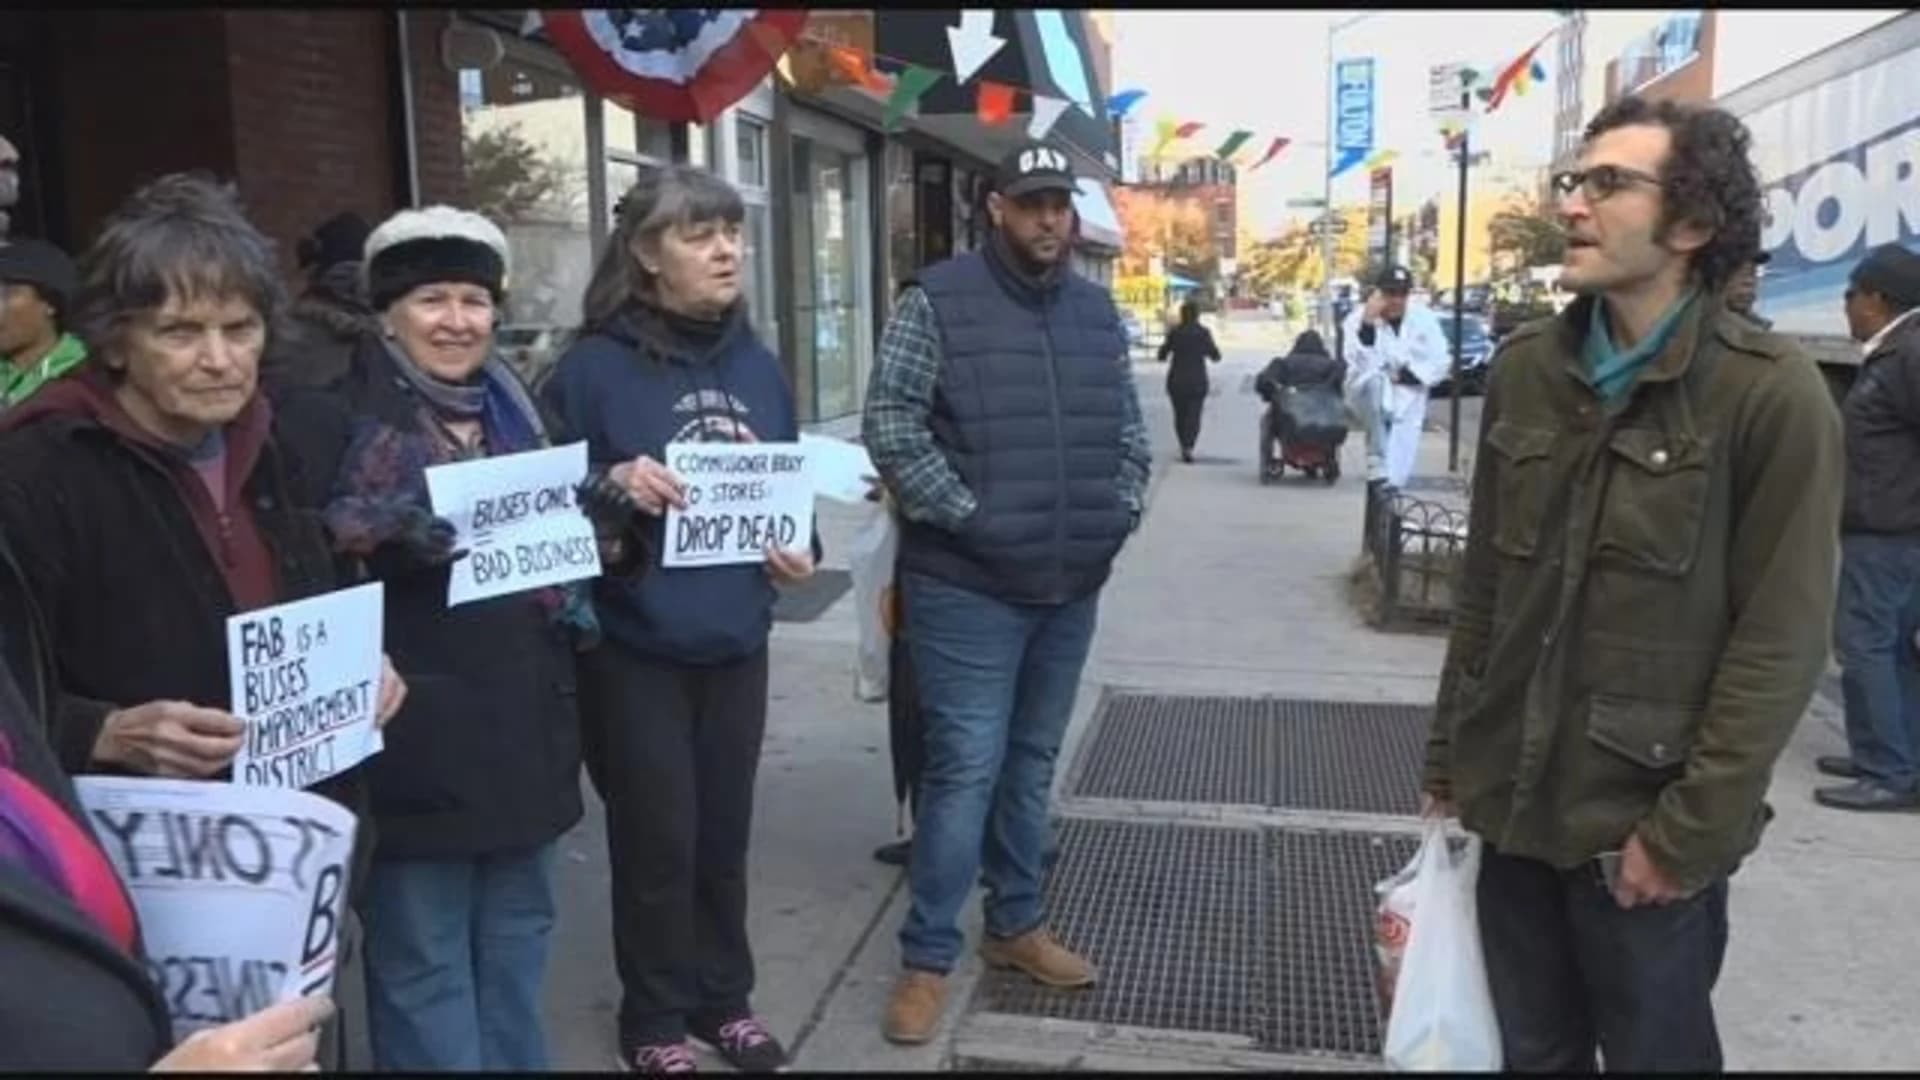 Protesters: Bus only lanes to hurt small businesses